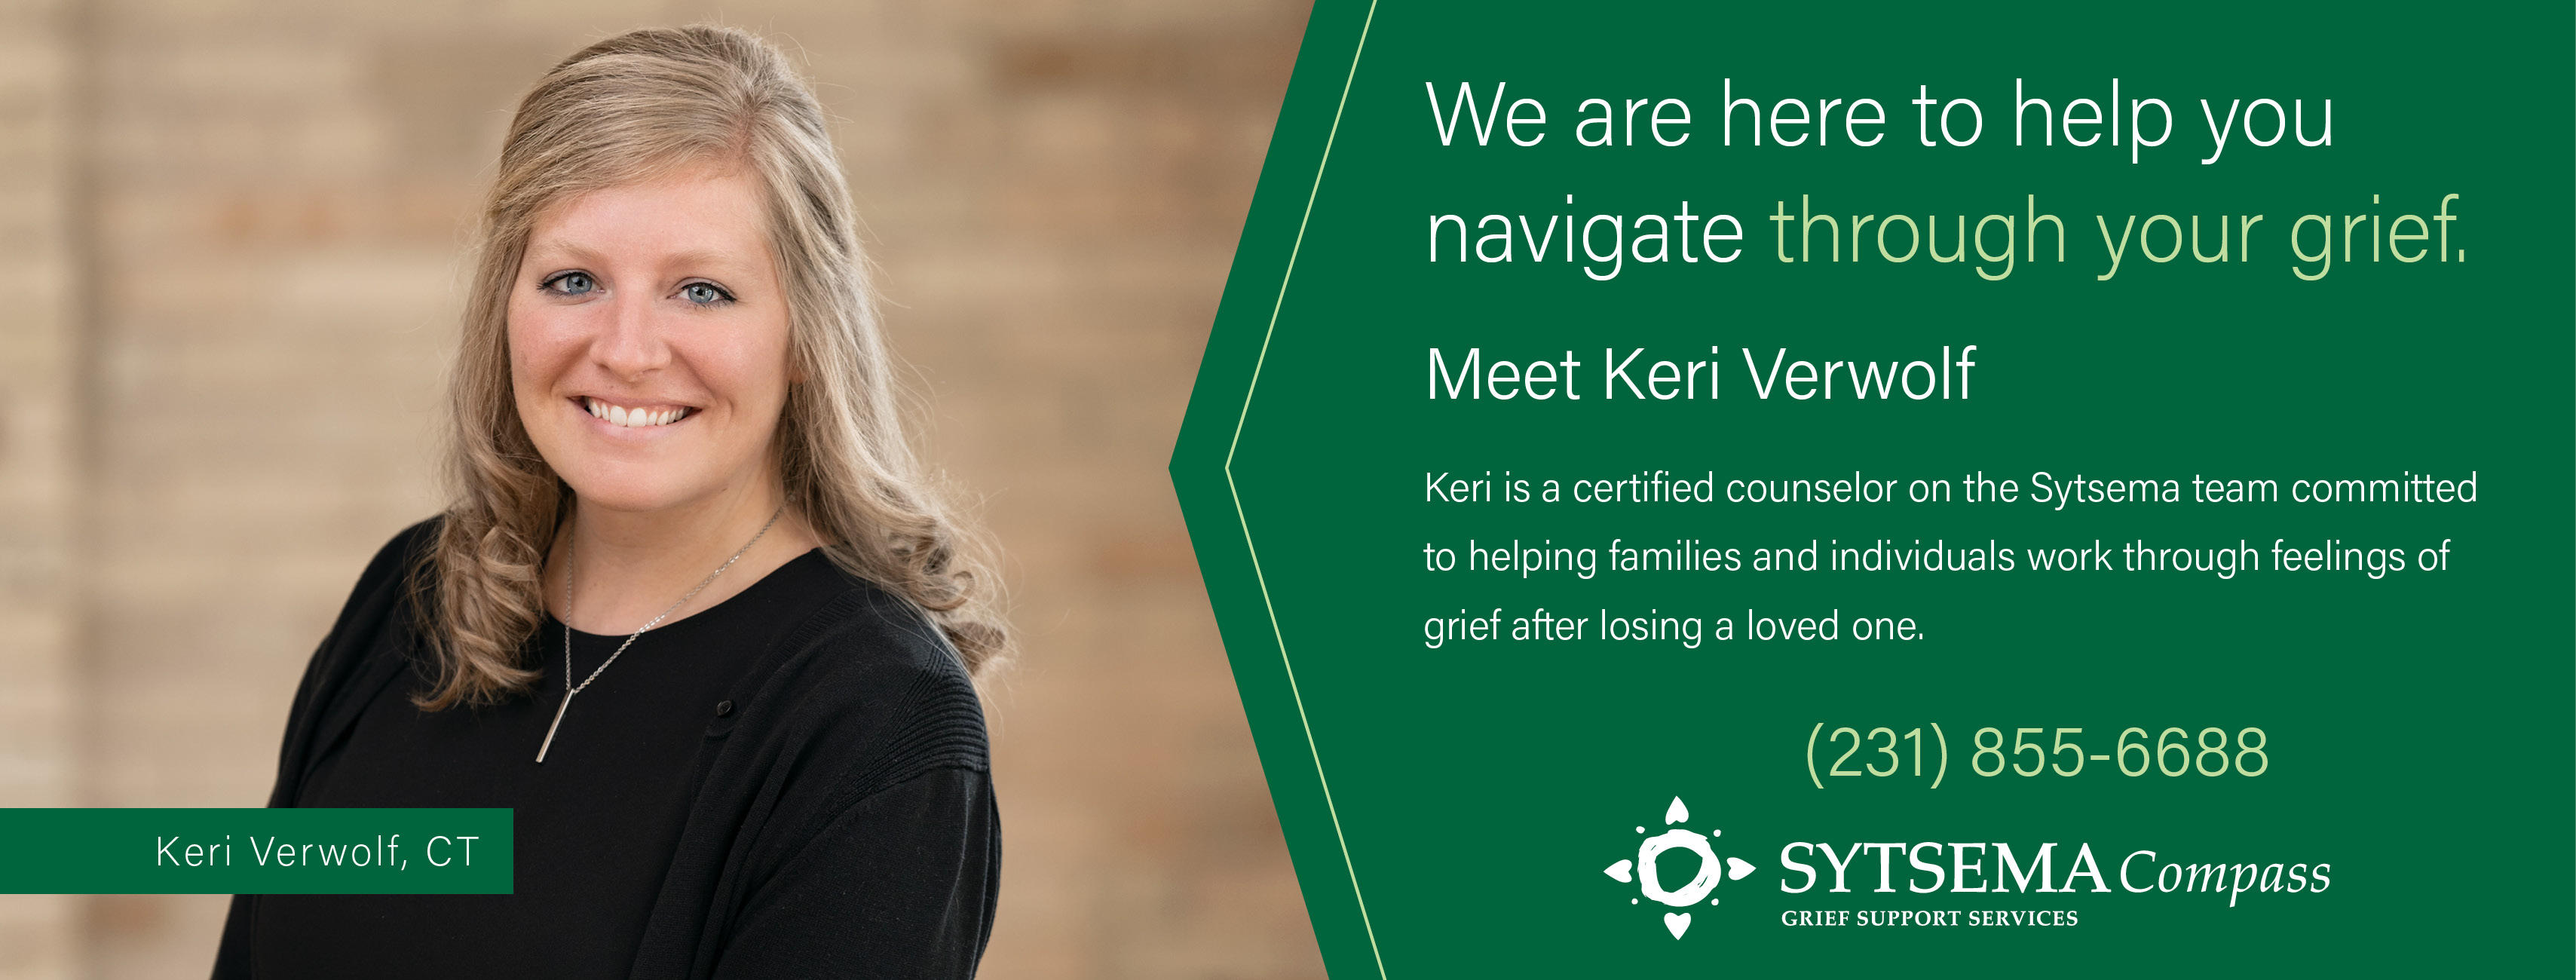 We are here to help you navigate through your grief.